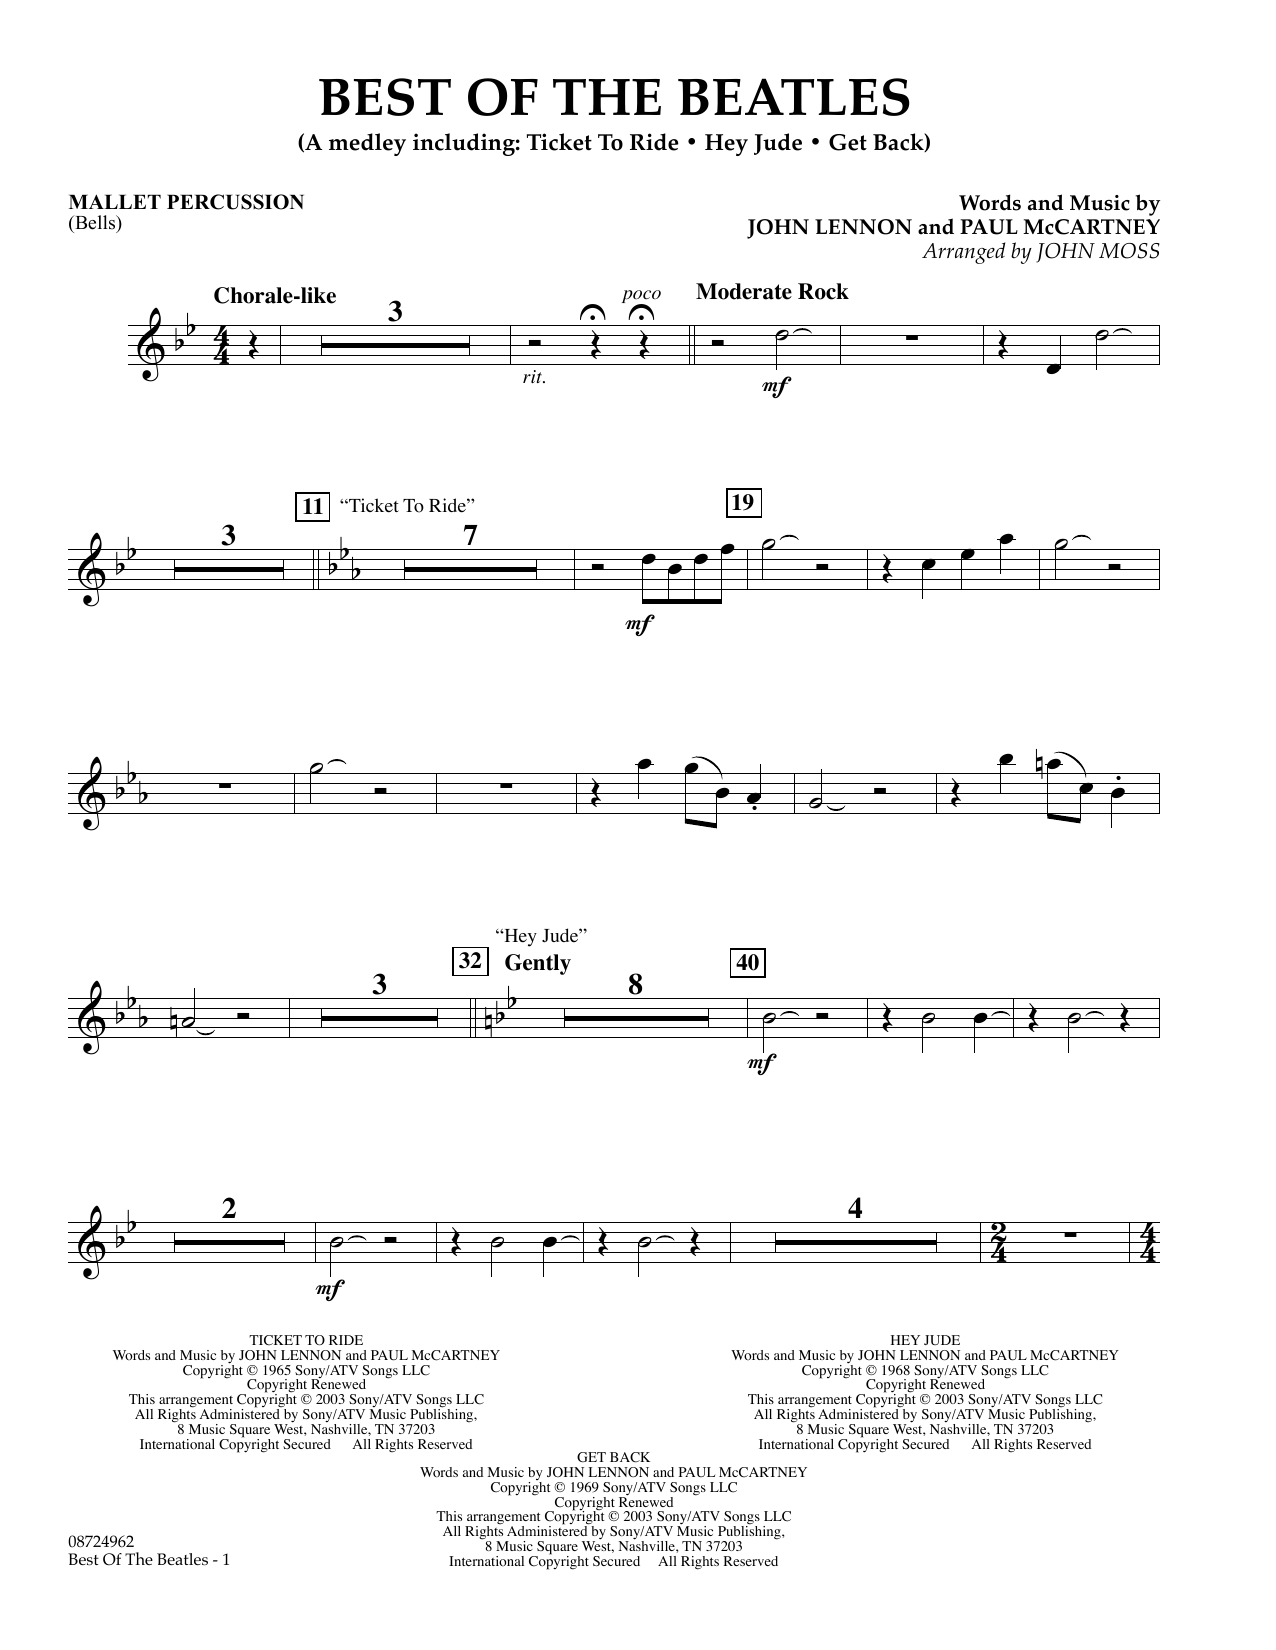 Download John Moss Best of the Beatles - Mallet Percussion Sheet Music